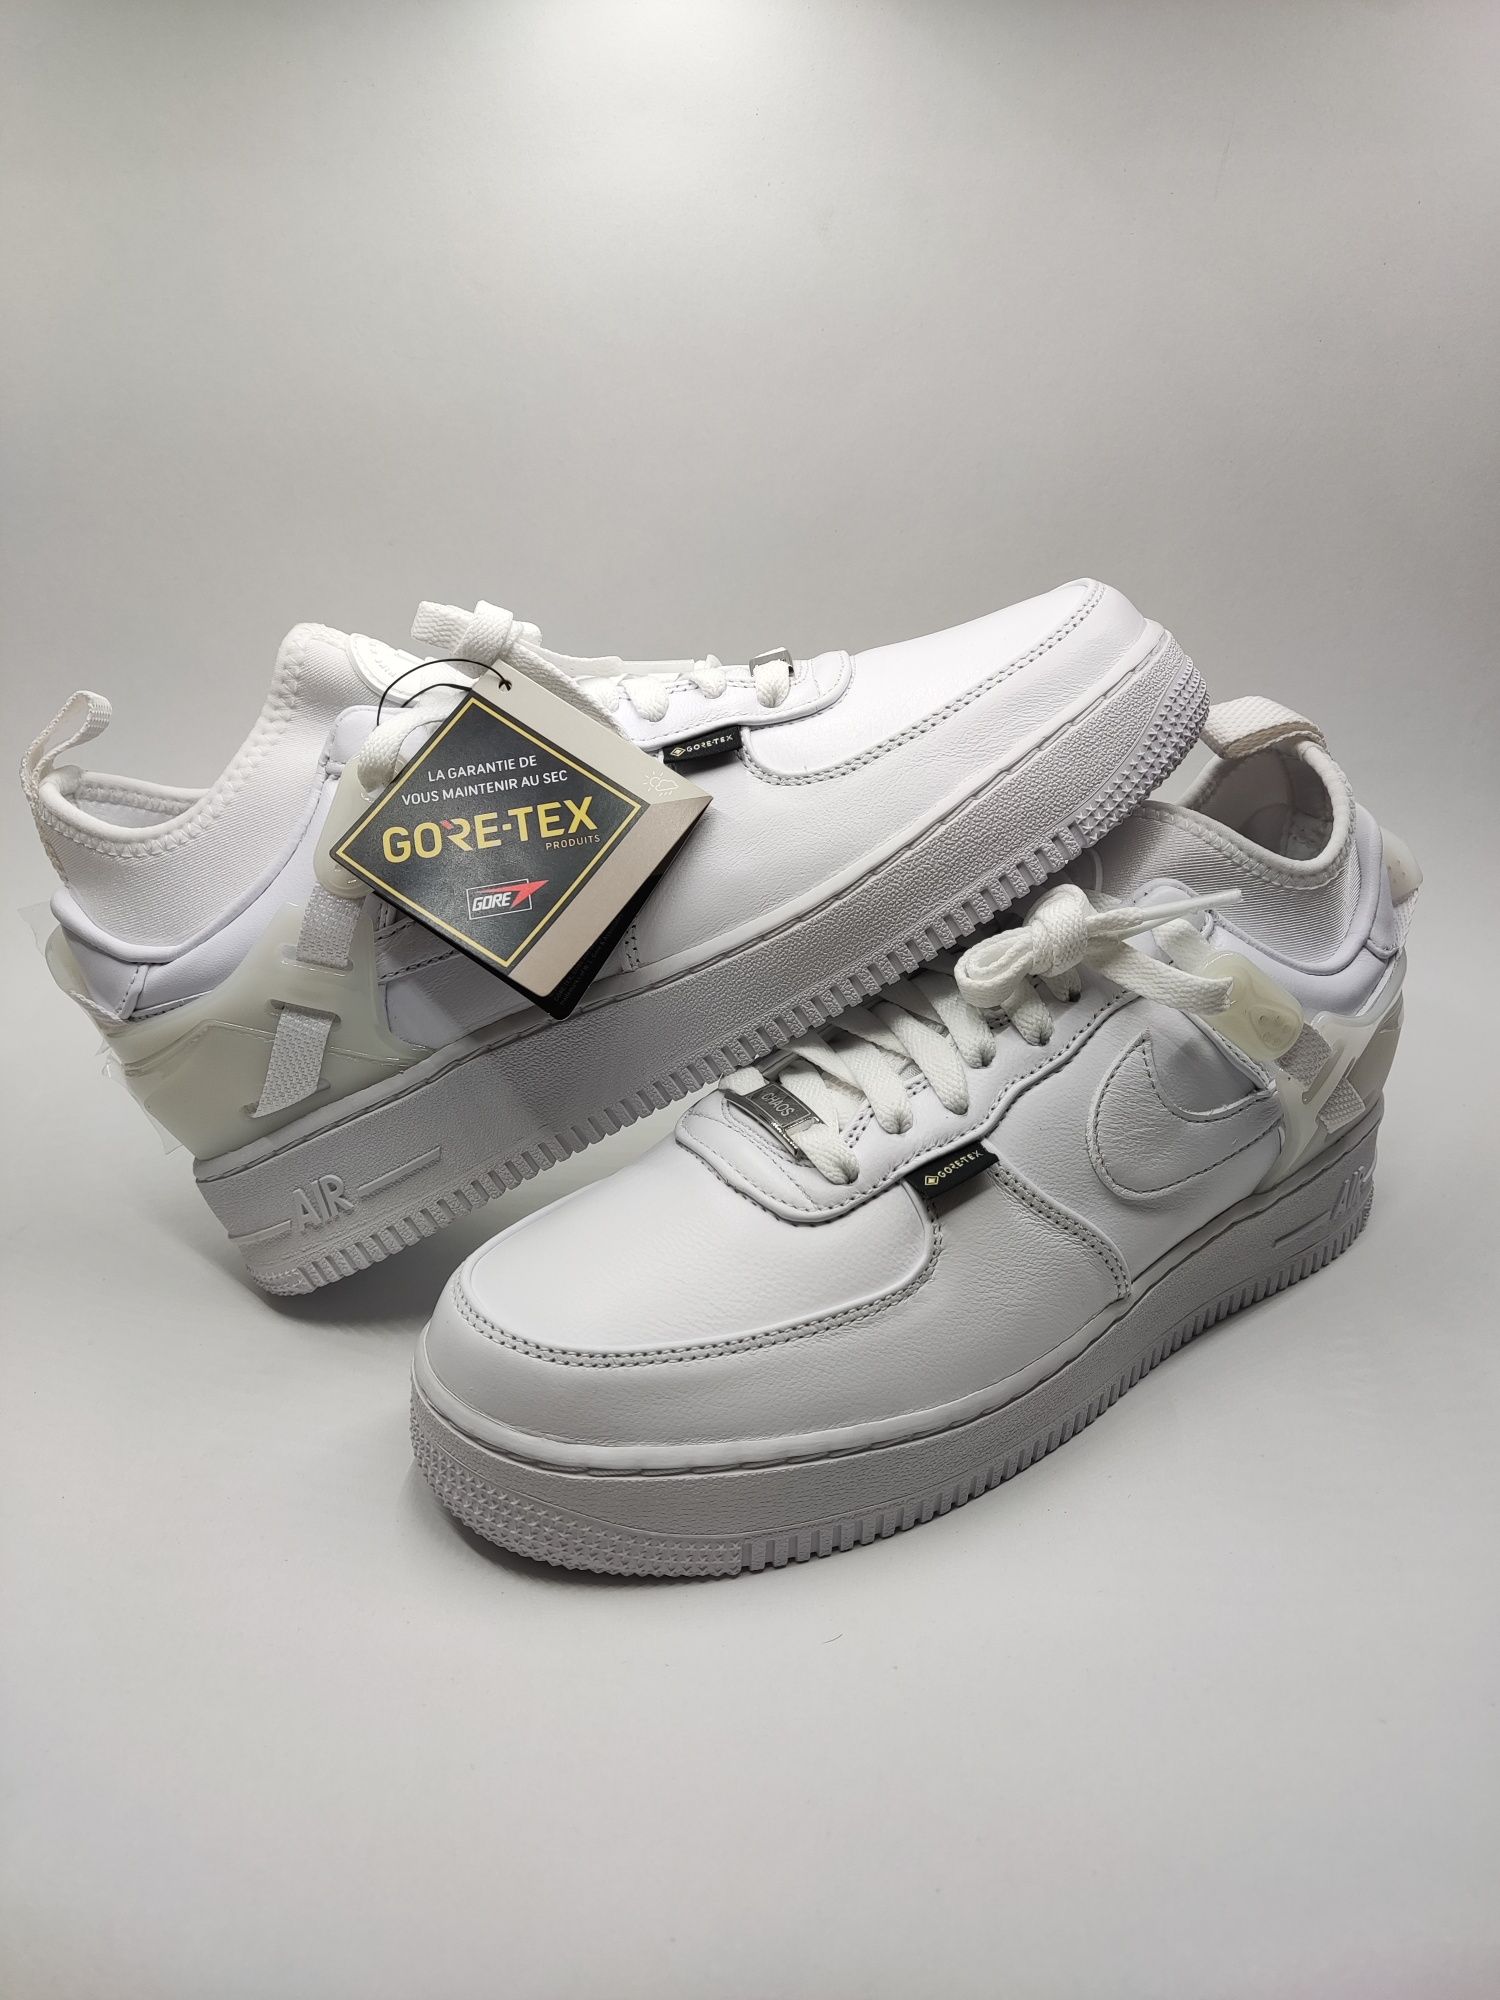 Nike Air Force 1 Low Undercover White Gore-Tex